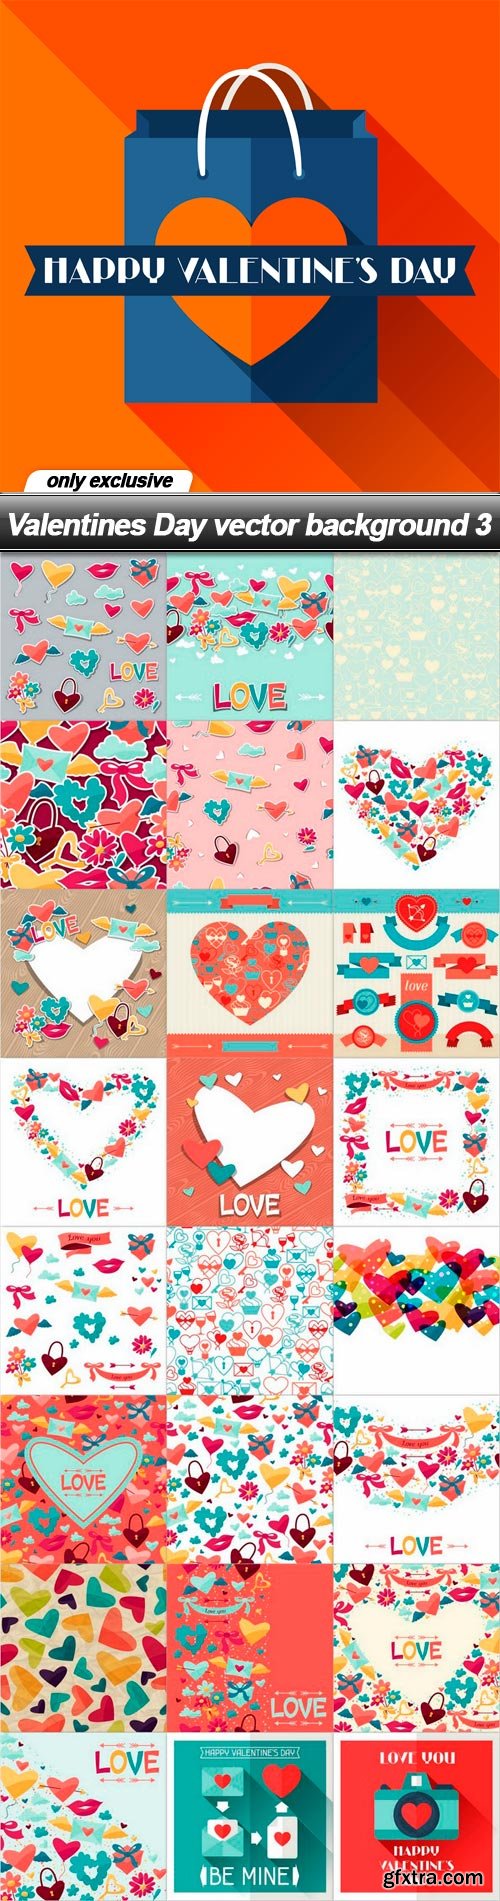 Valentines Day vector background 3 - 25 EPS